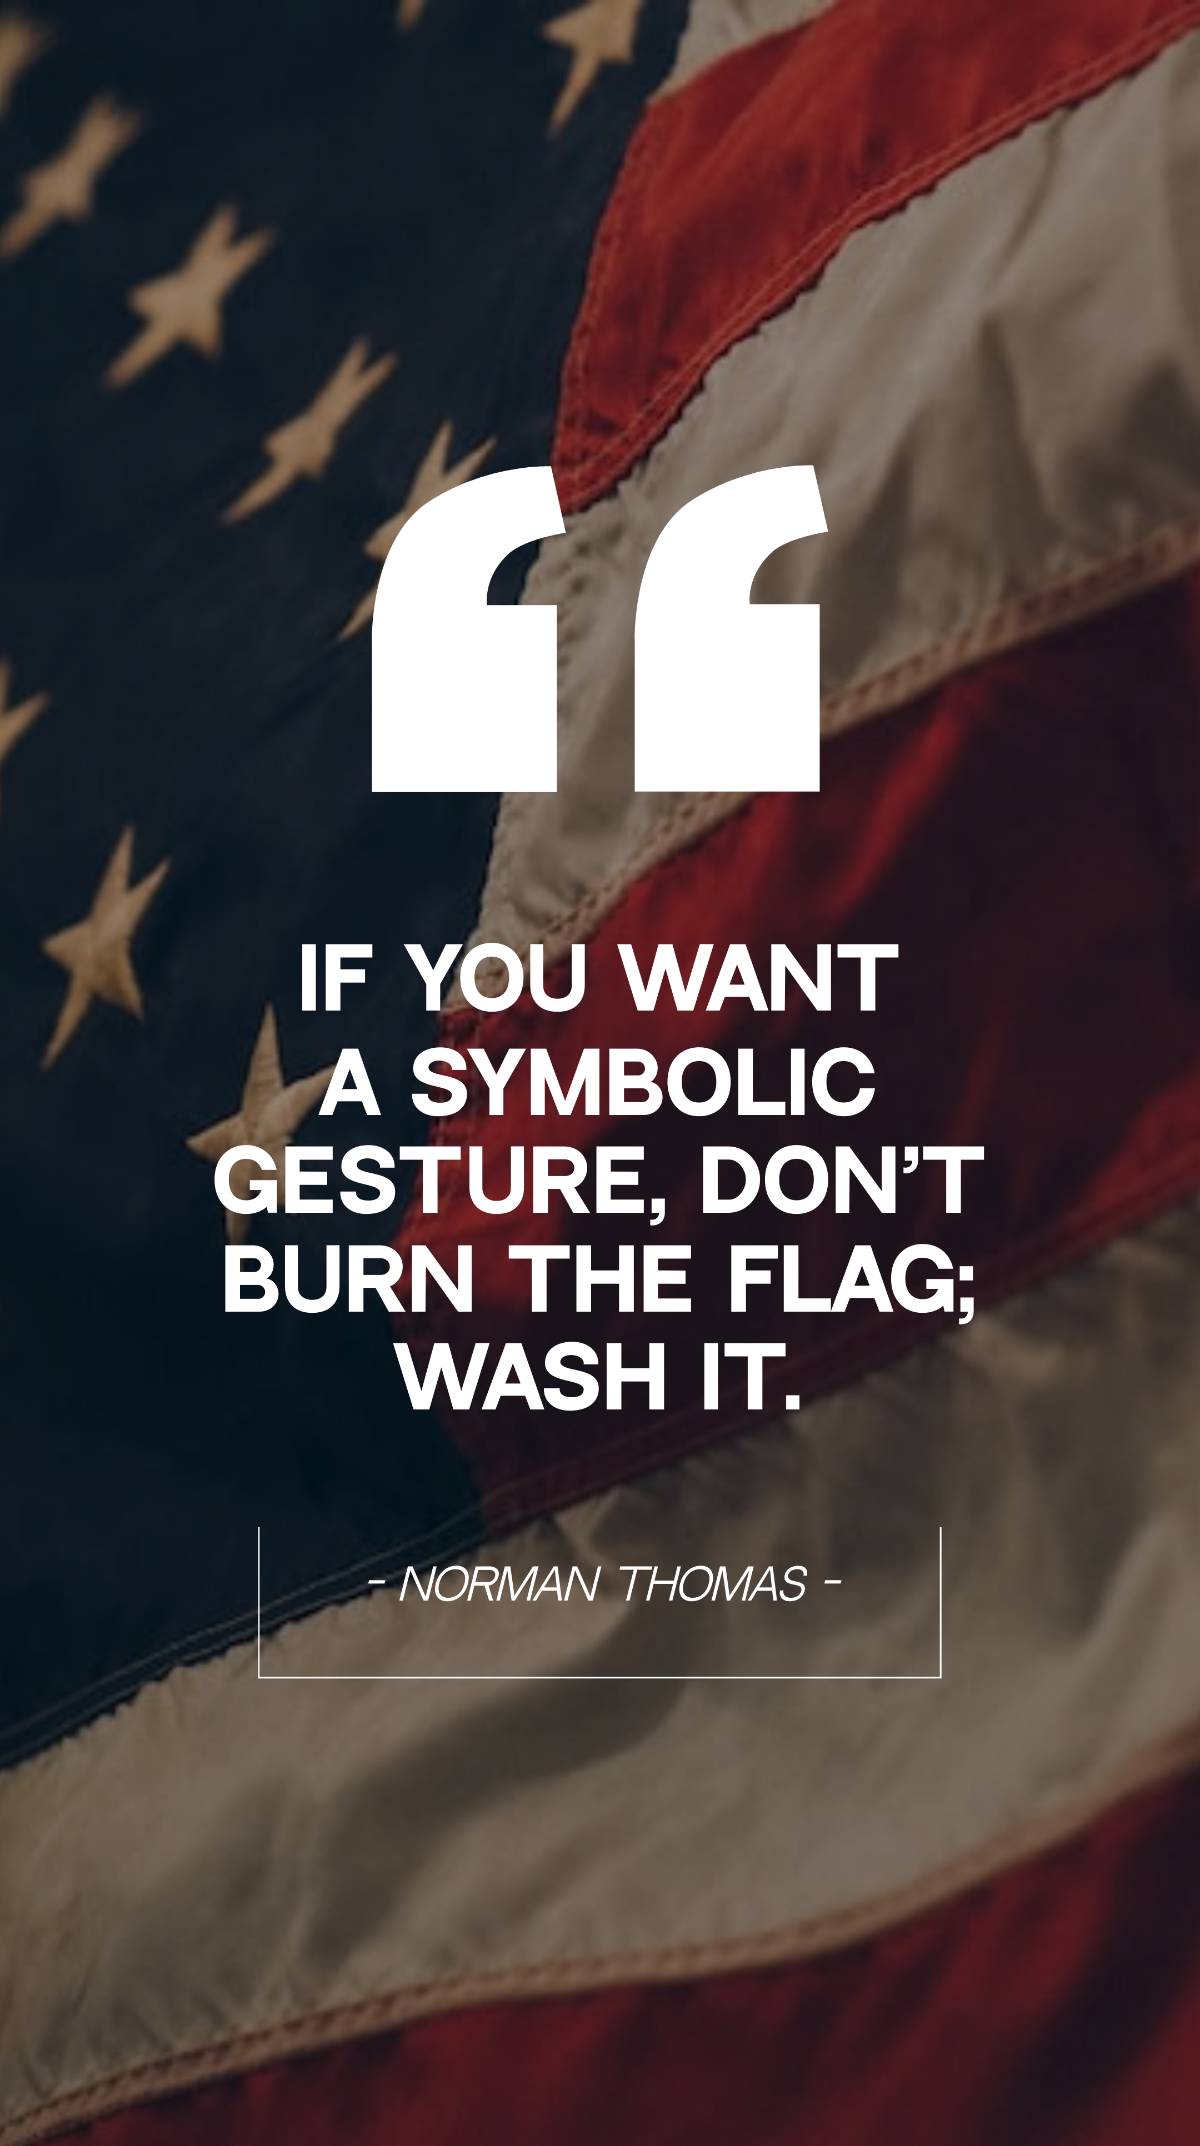 Norman Thomas - If you want a symbolic gesture, don’t burn the flag; wash it. Template